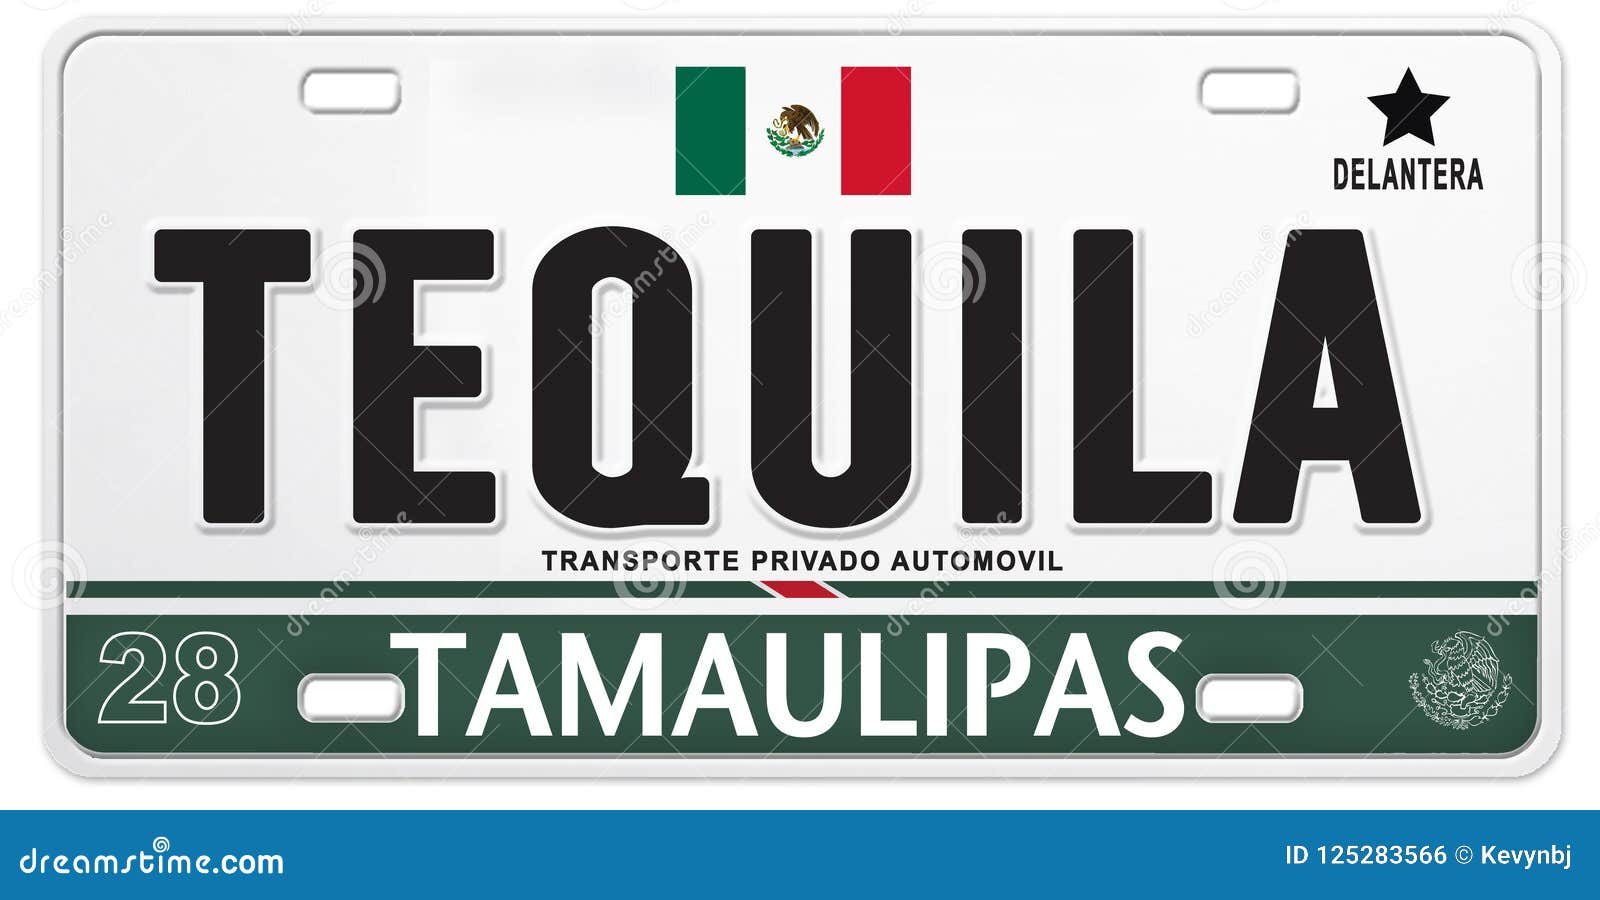 Details about   TIBURONES ROJA Mexican Soccer Futbol Mexico Vehicle License Plate Car MX Fútbol